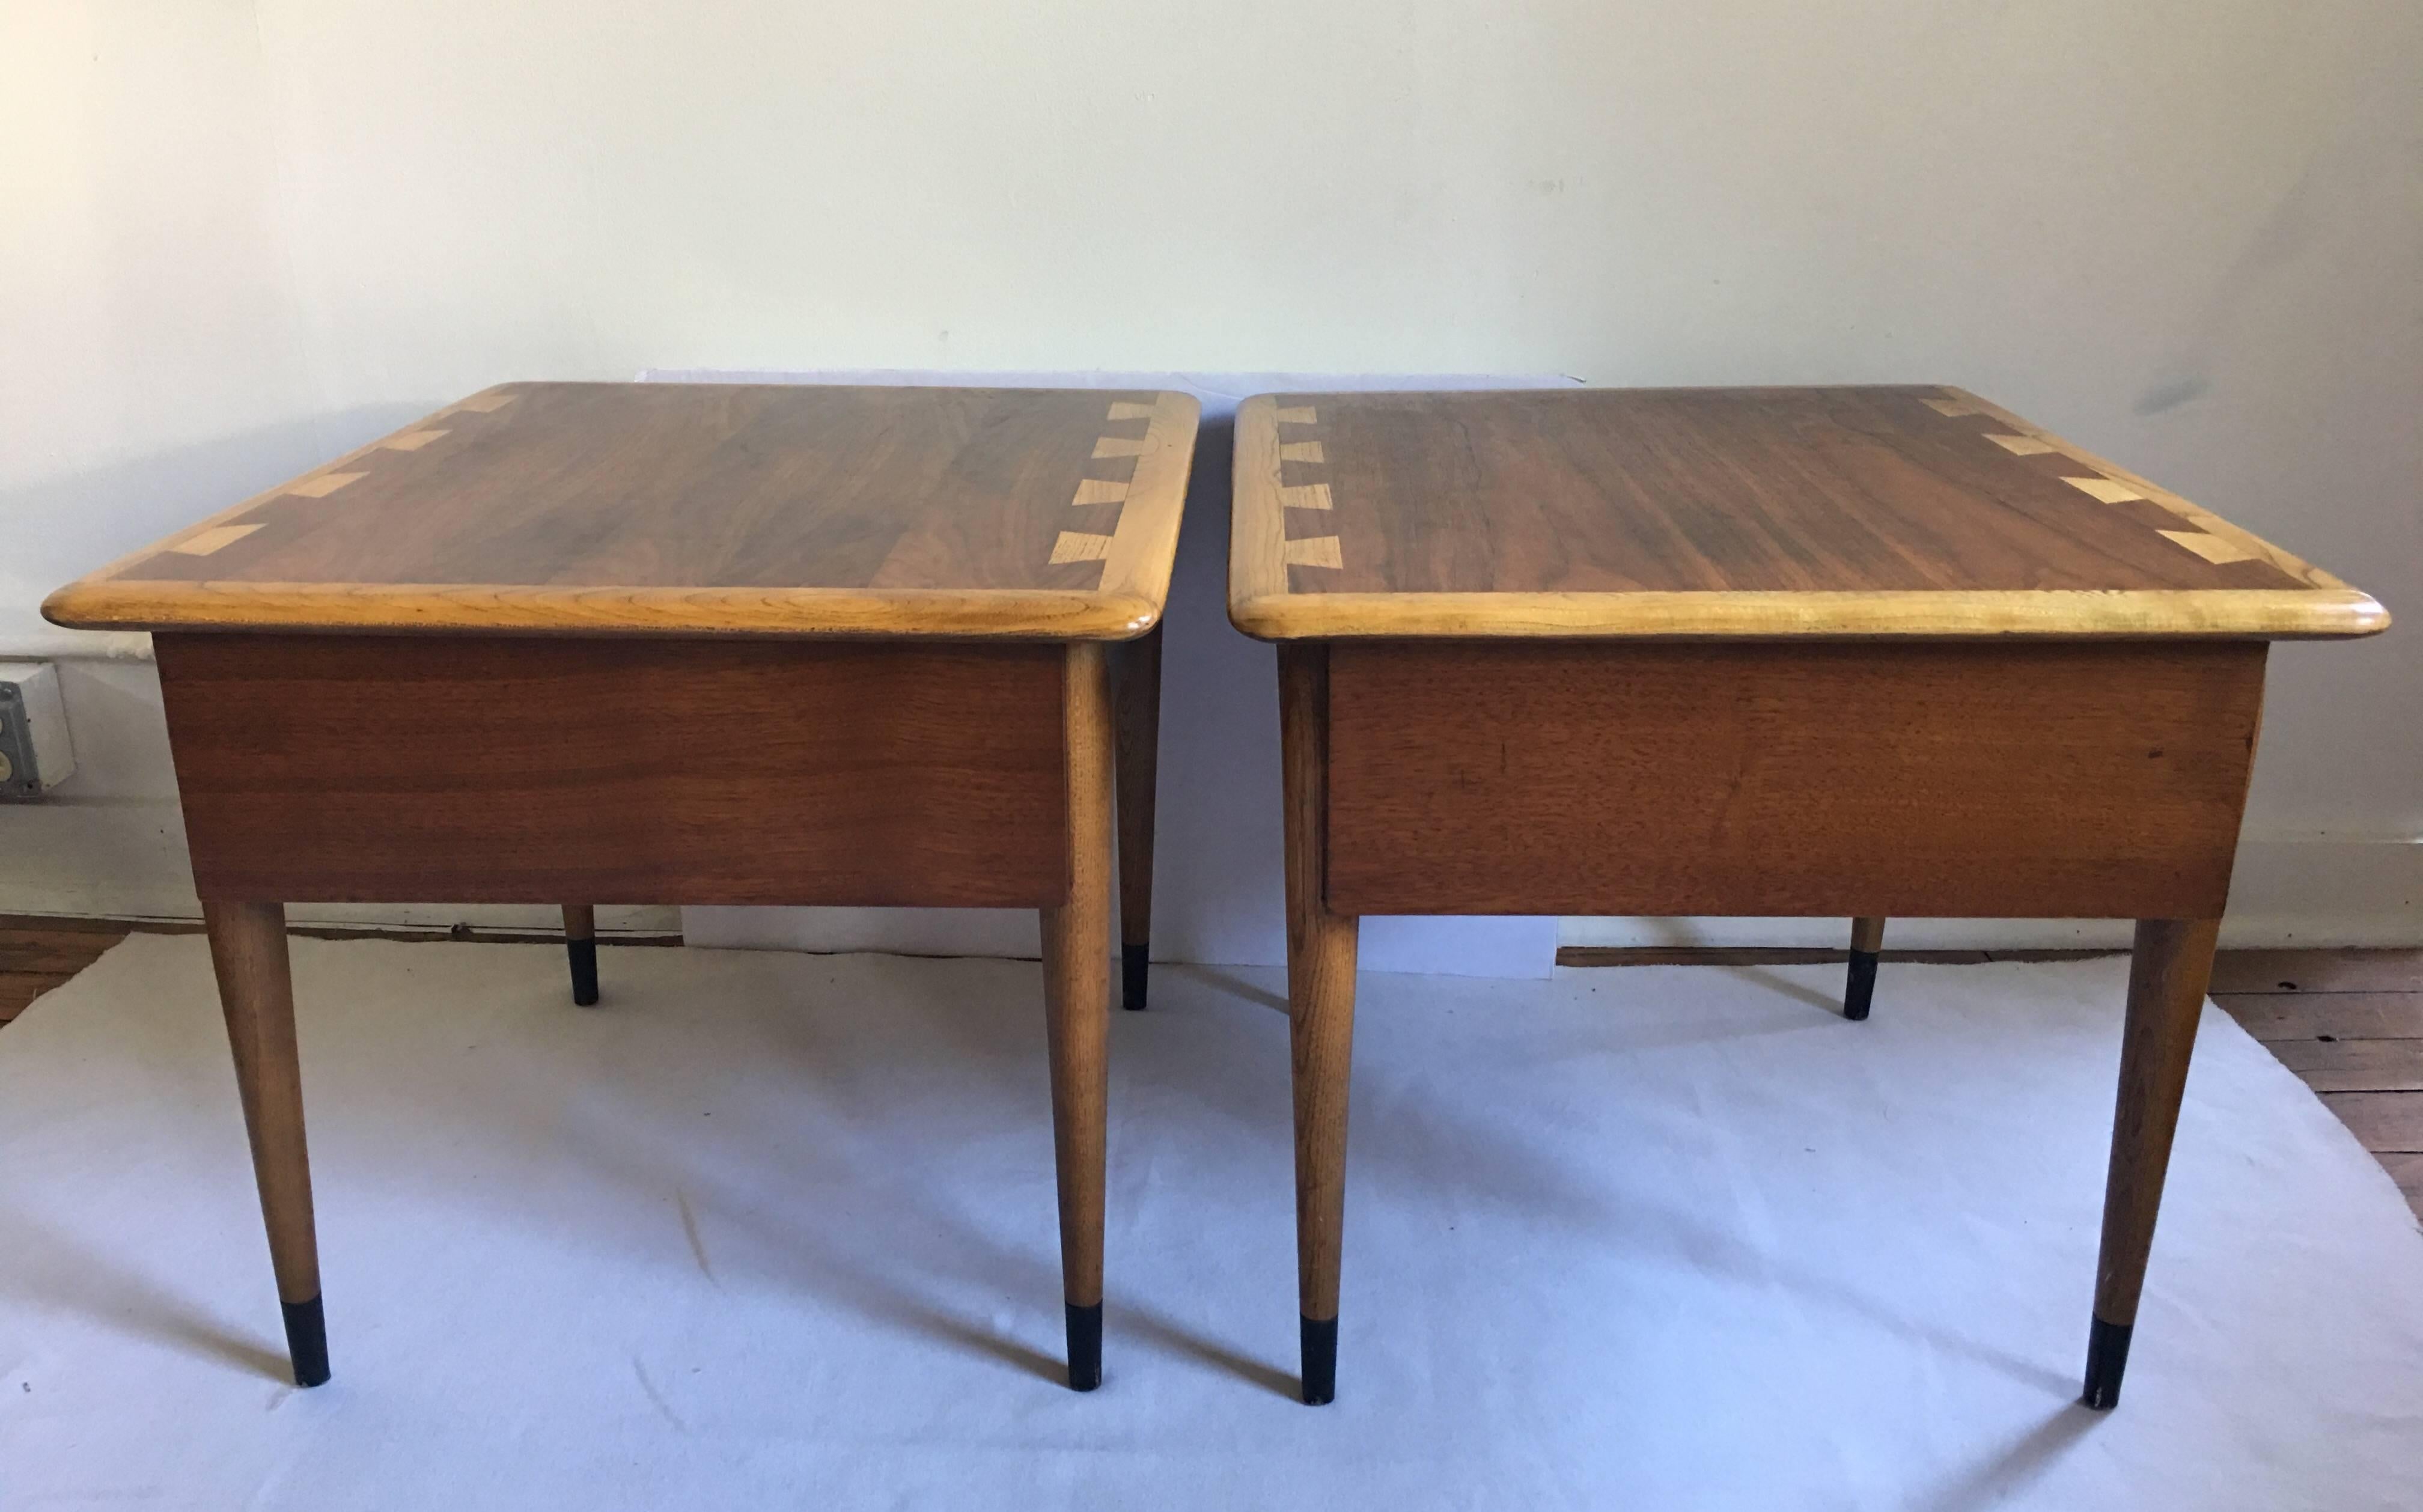 Pair of Danish inspired Lane AltaVista side tables designed by Andre Bus for Lane's iconic Acclaim series. Tables feature a two-tone top with an inset dark walnut veneer and solid oak bullnose edge with signature Acclaim decorative dovetails. These